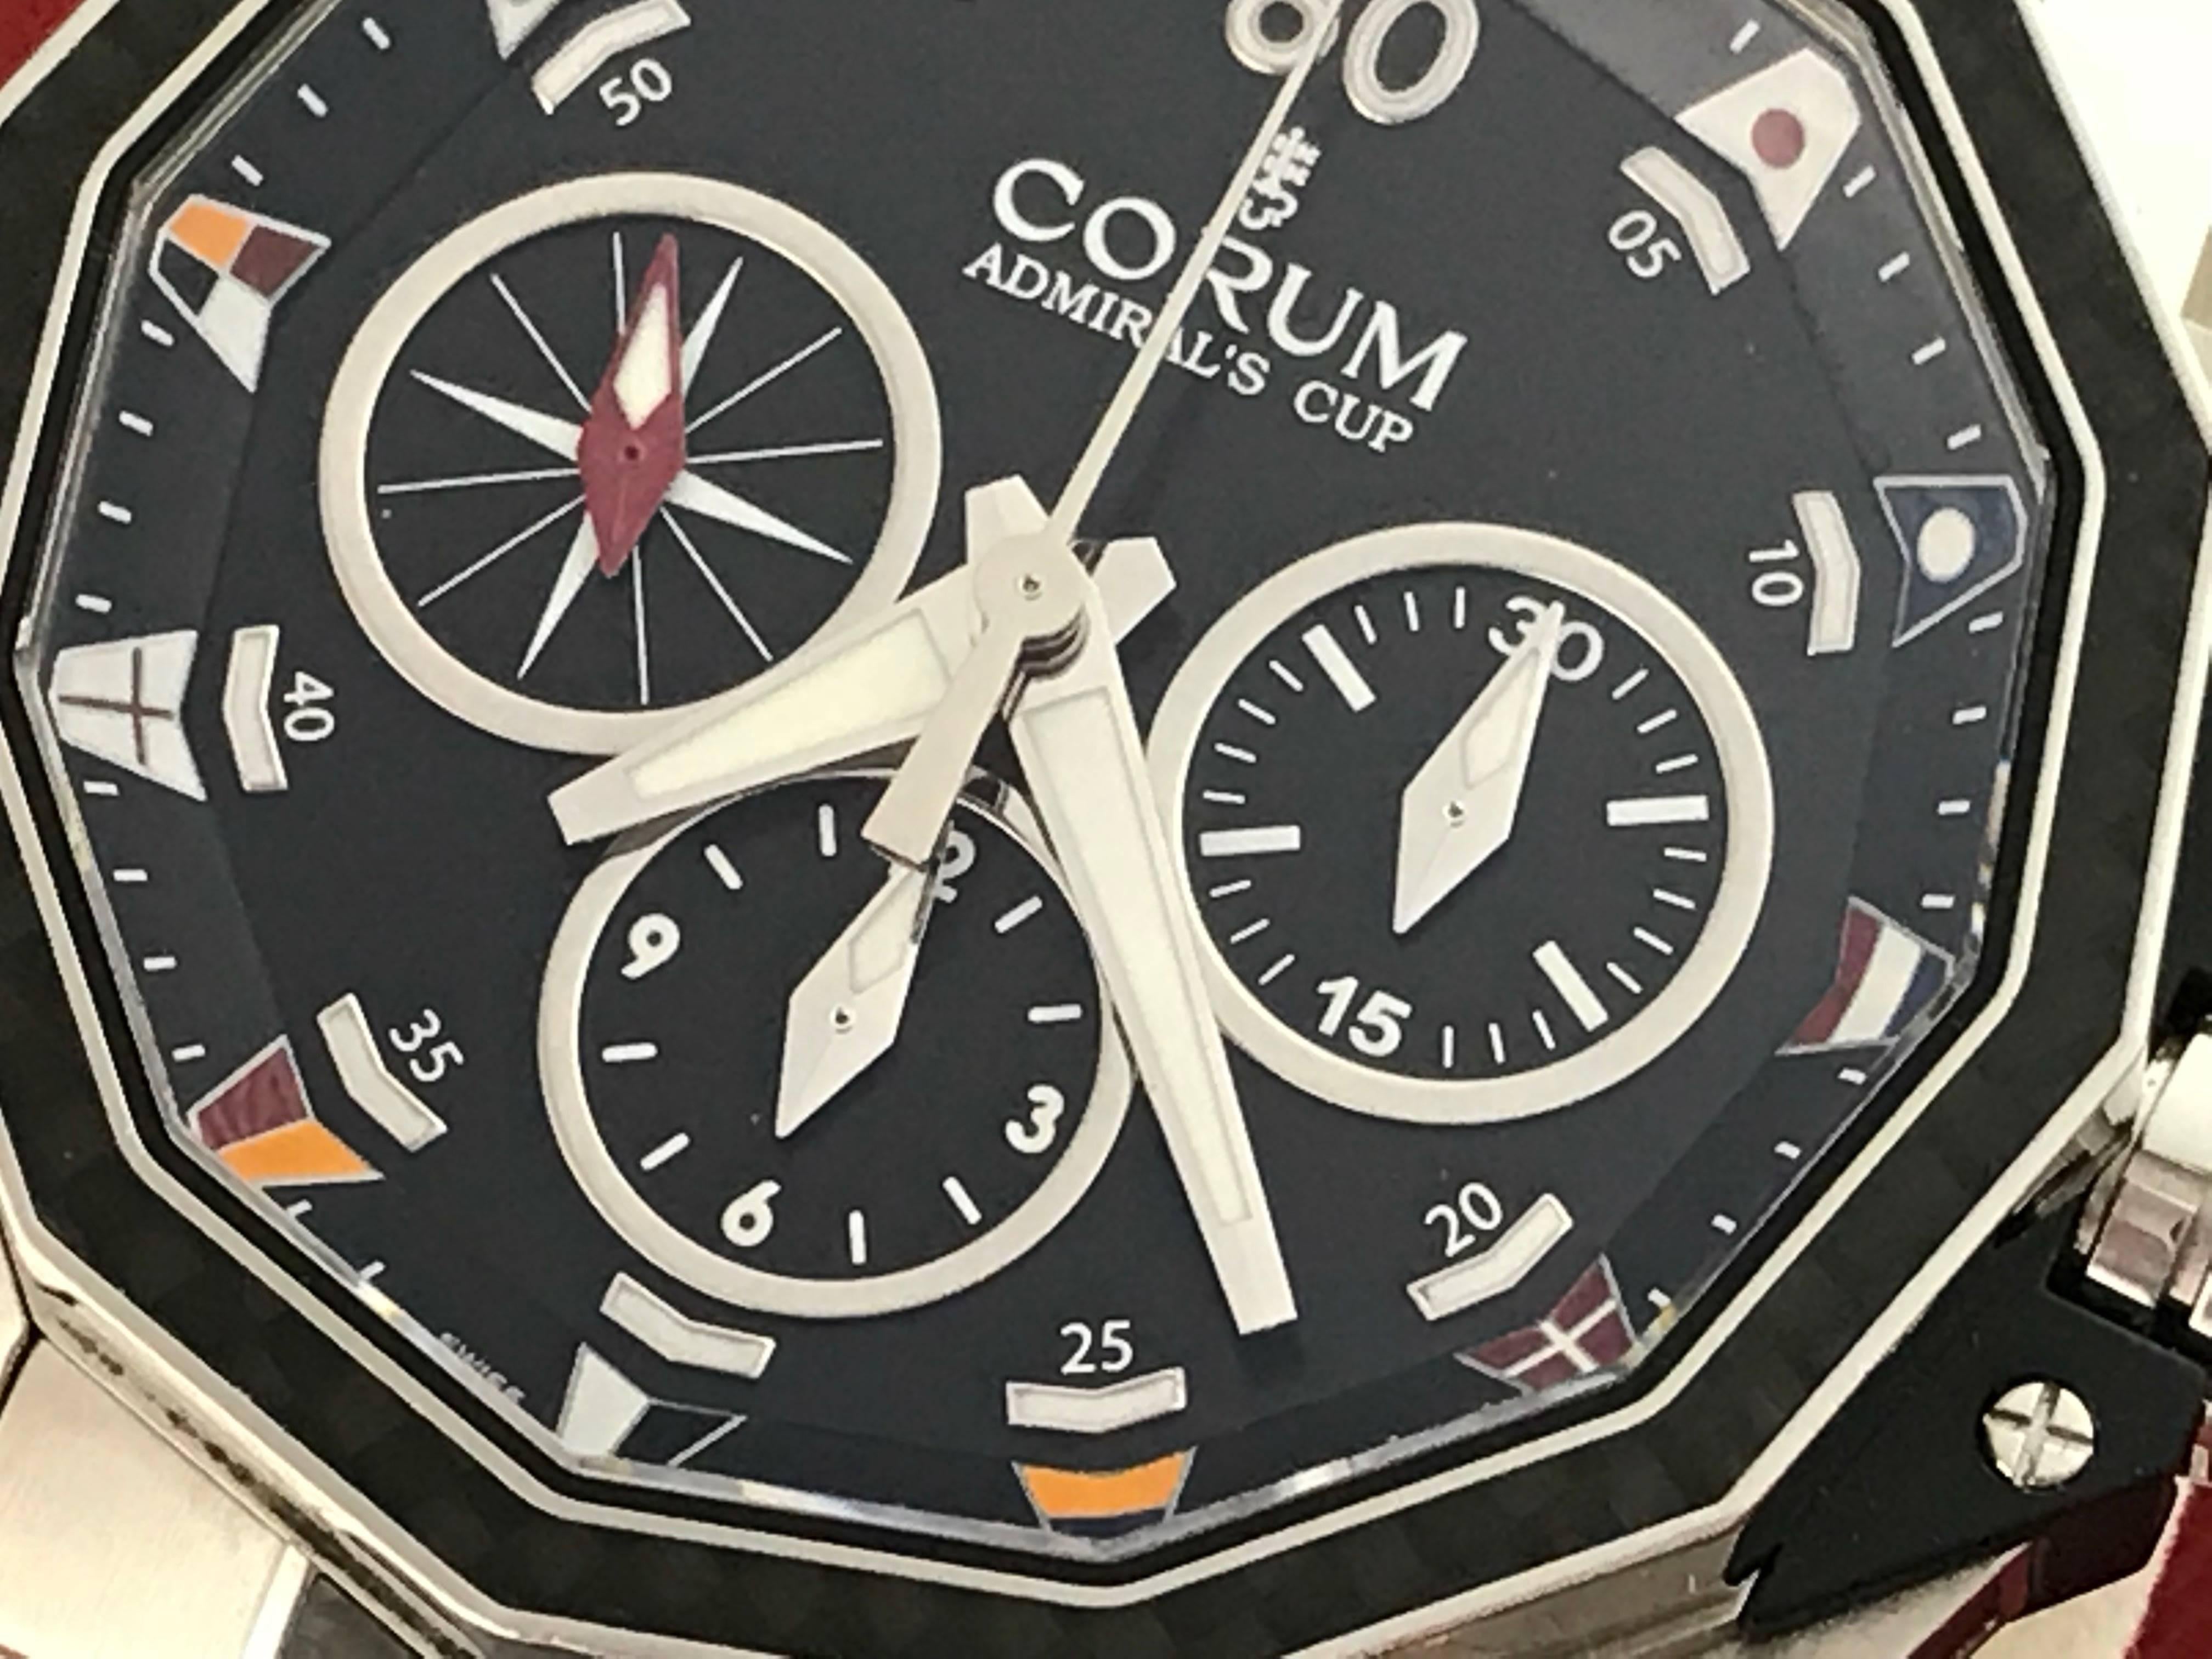 Corum Admiral's Cup Challenge 44 Model 44 986.691.11/V761 A
Pre Owned Mens Rattranpante (Split Seconds) Chronograph. Caliber CO986 Automatic Winding Movement with Thirty-One Jewels. Limited Edition of 1000 Individually Numbered Pieces.
Black Dial